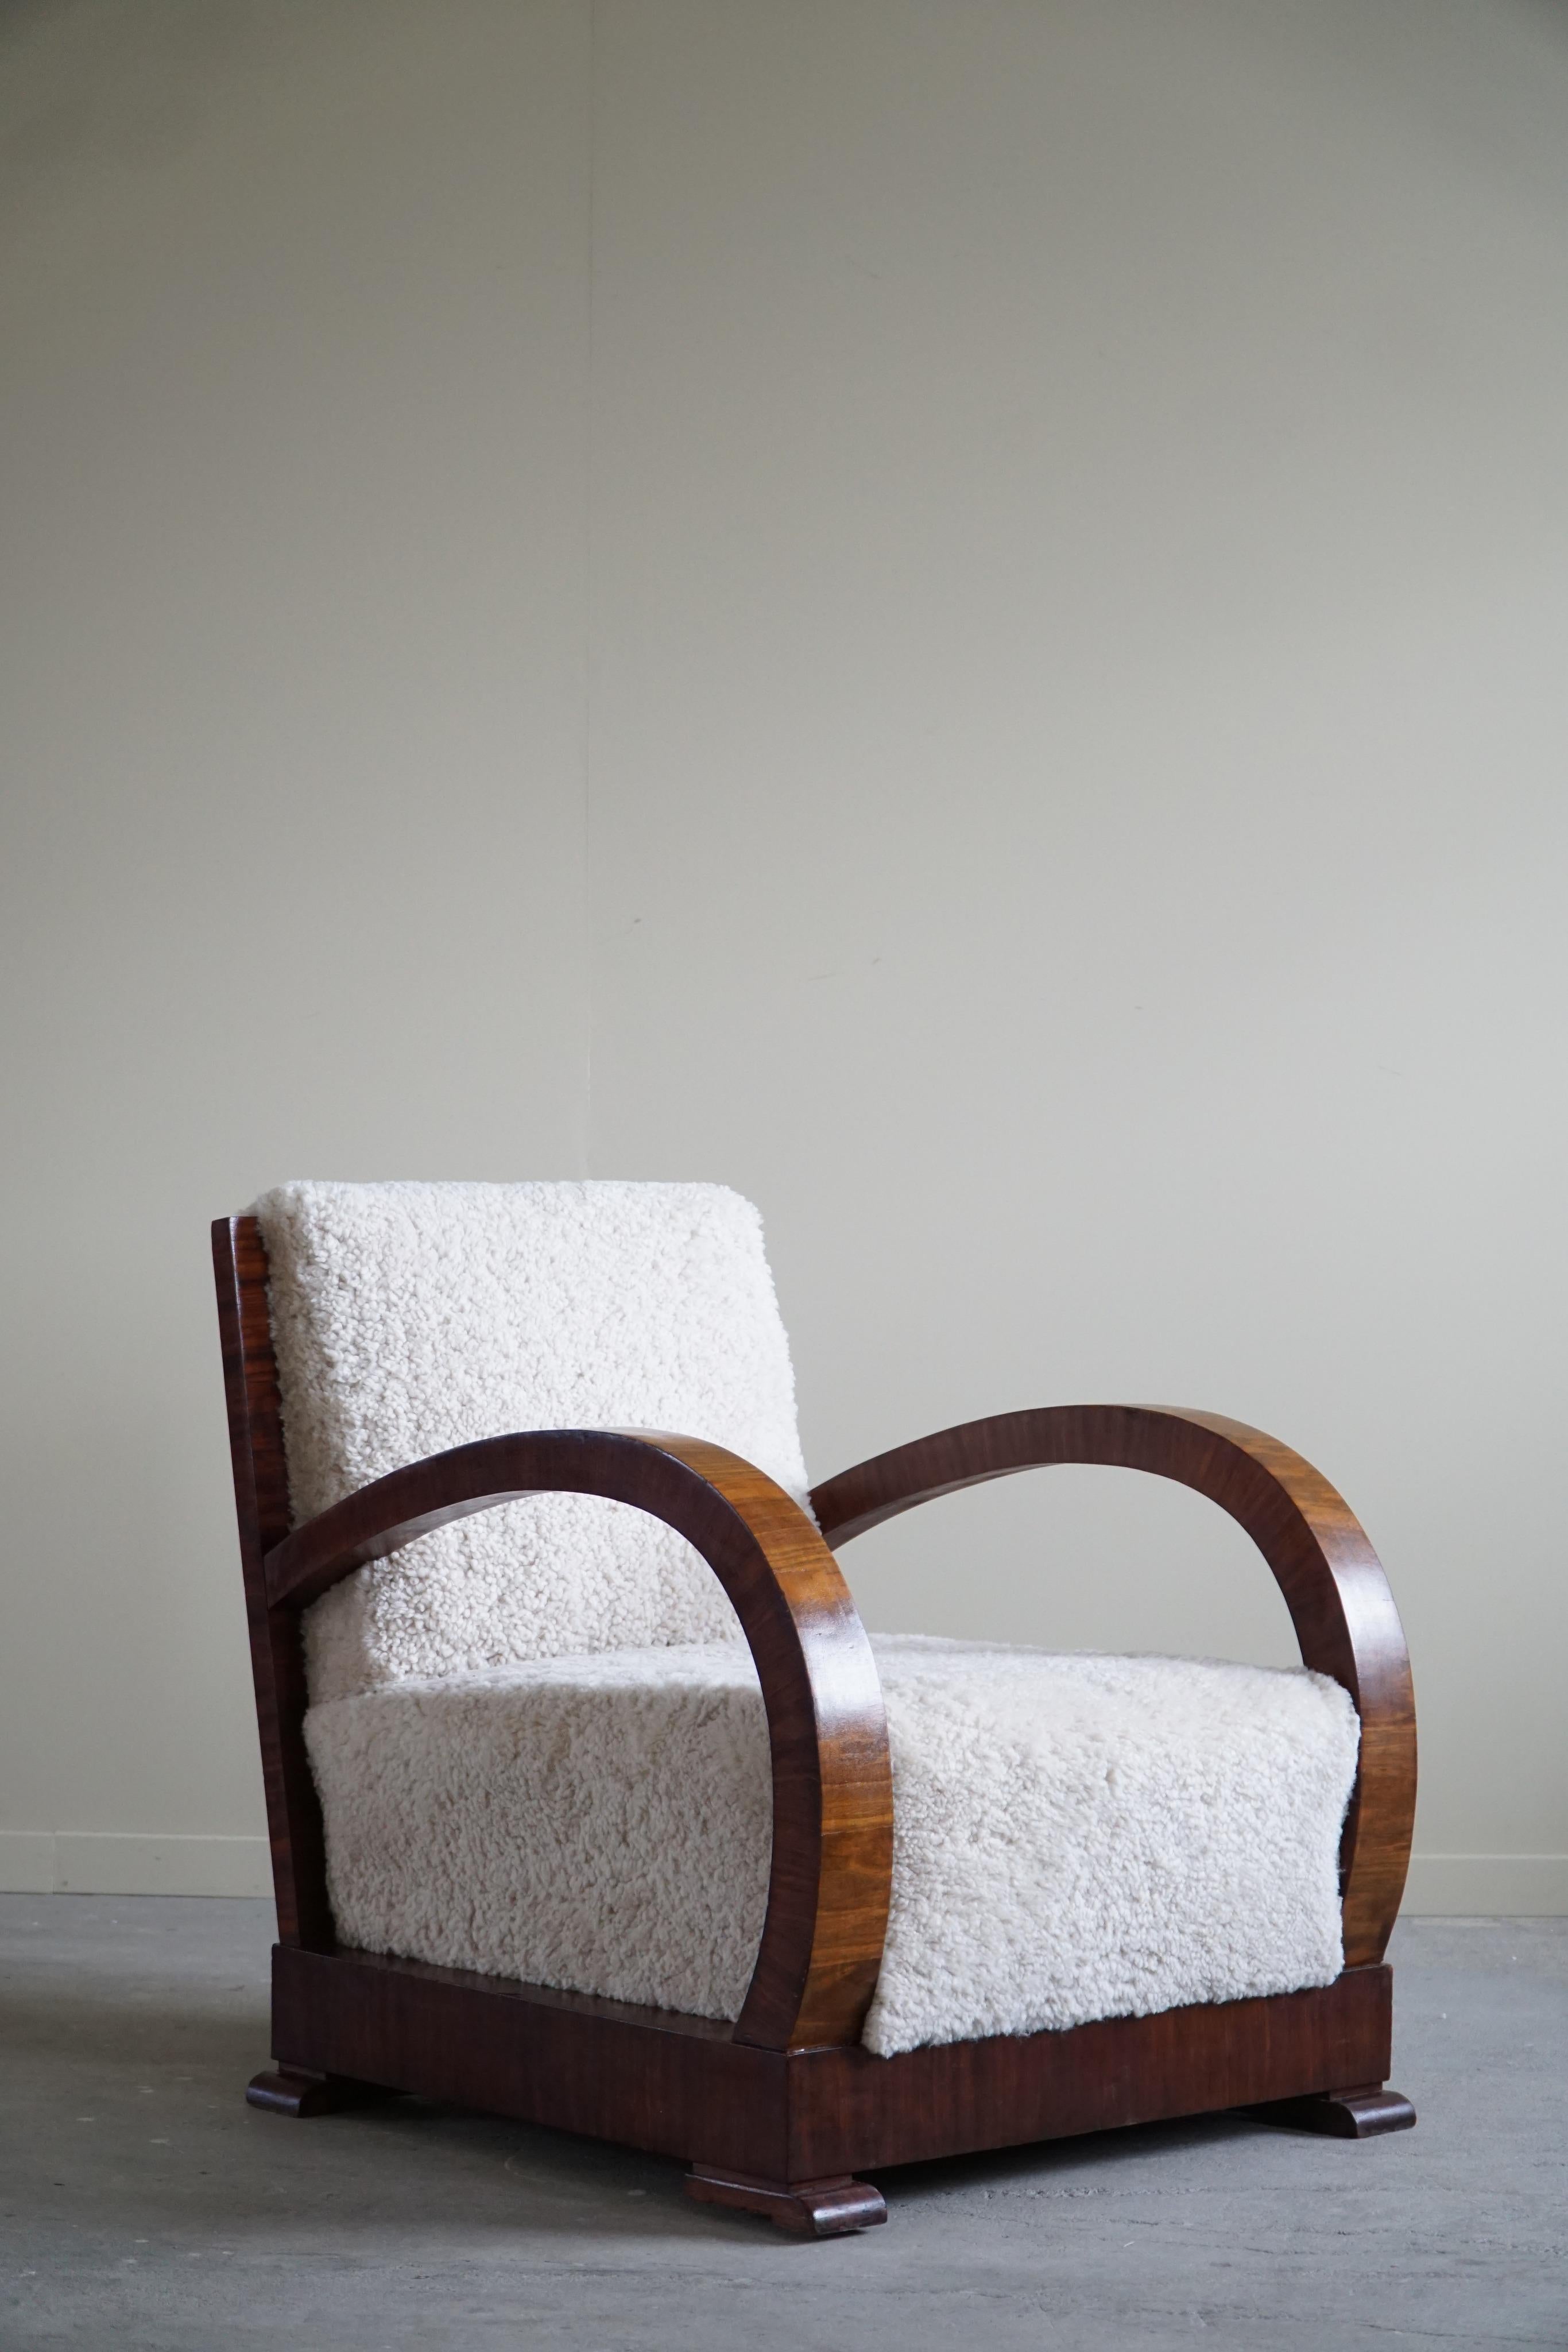 Wool Pair of Danish Lounge Chairs, Reupholstered, Lambswool & Walnut, Art Deco, 1930s For Sale